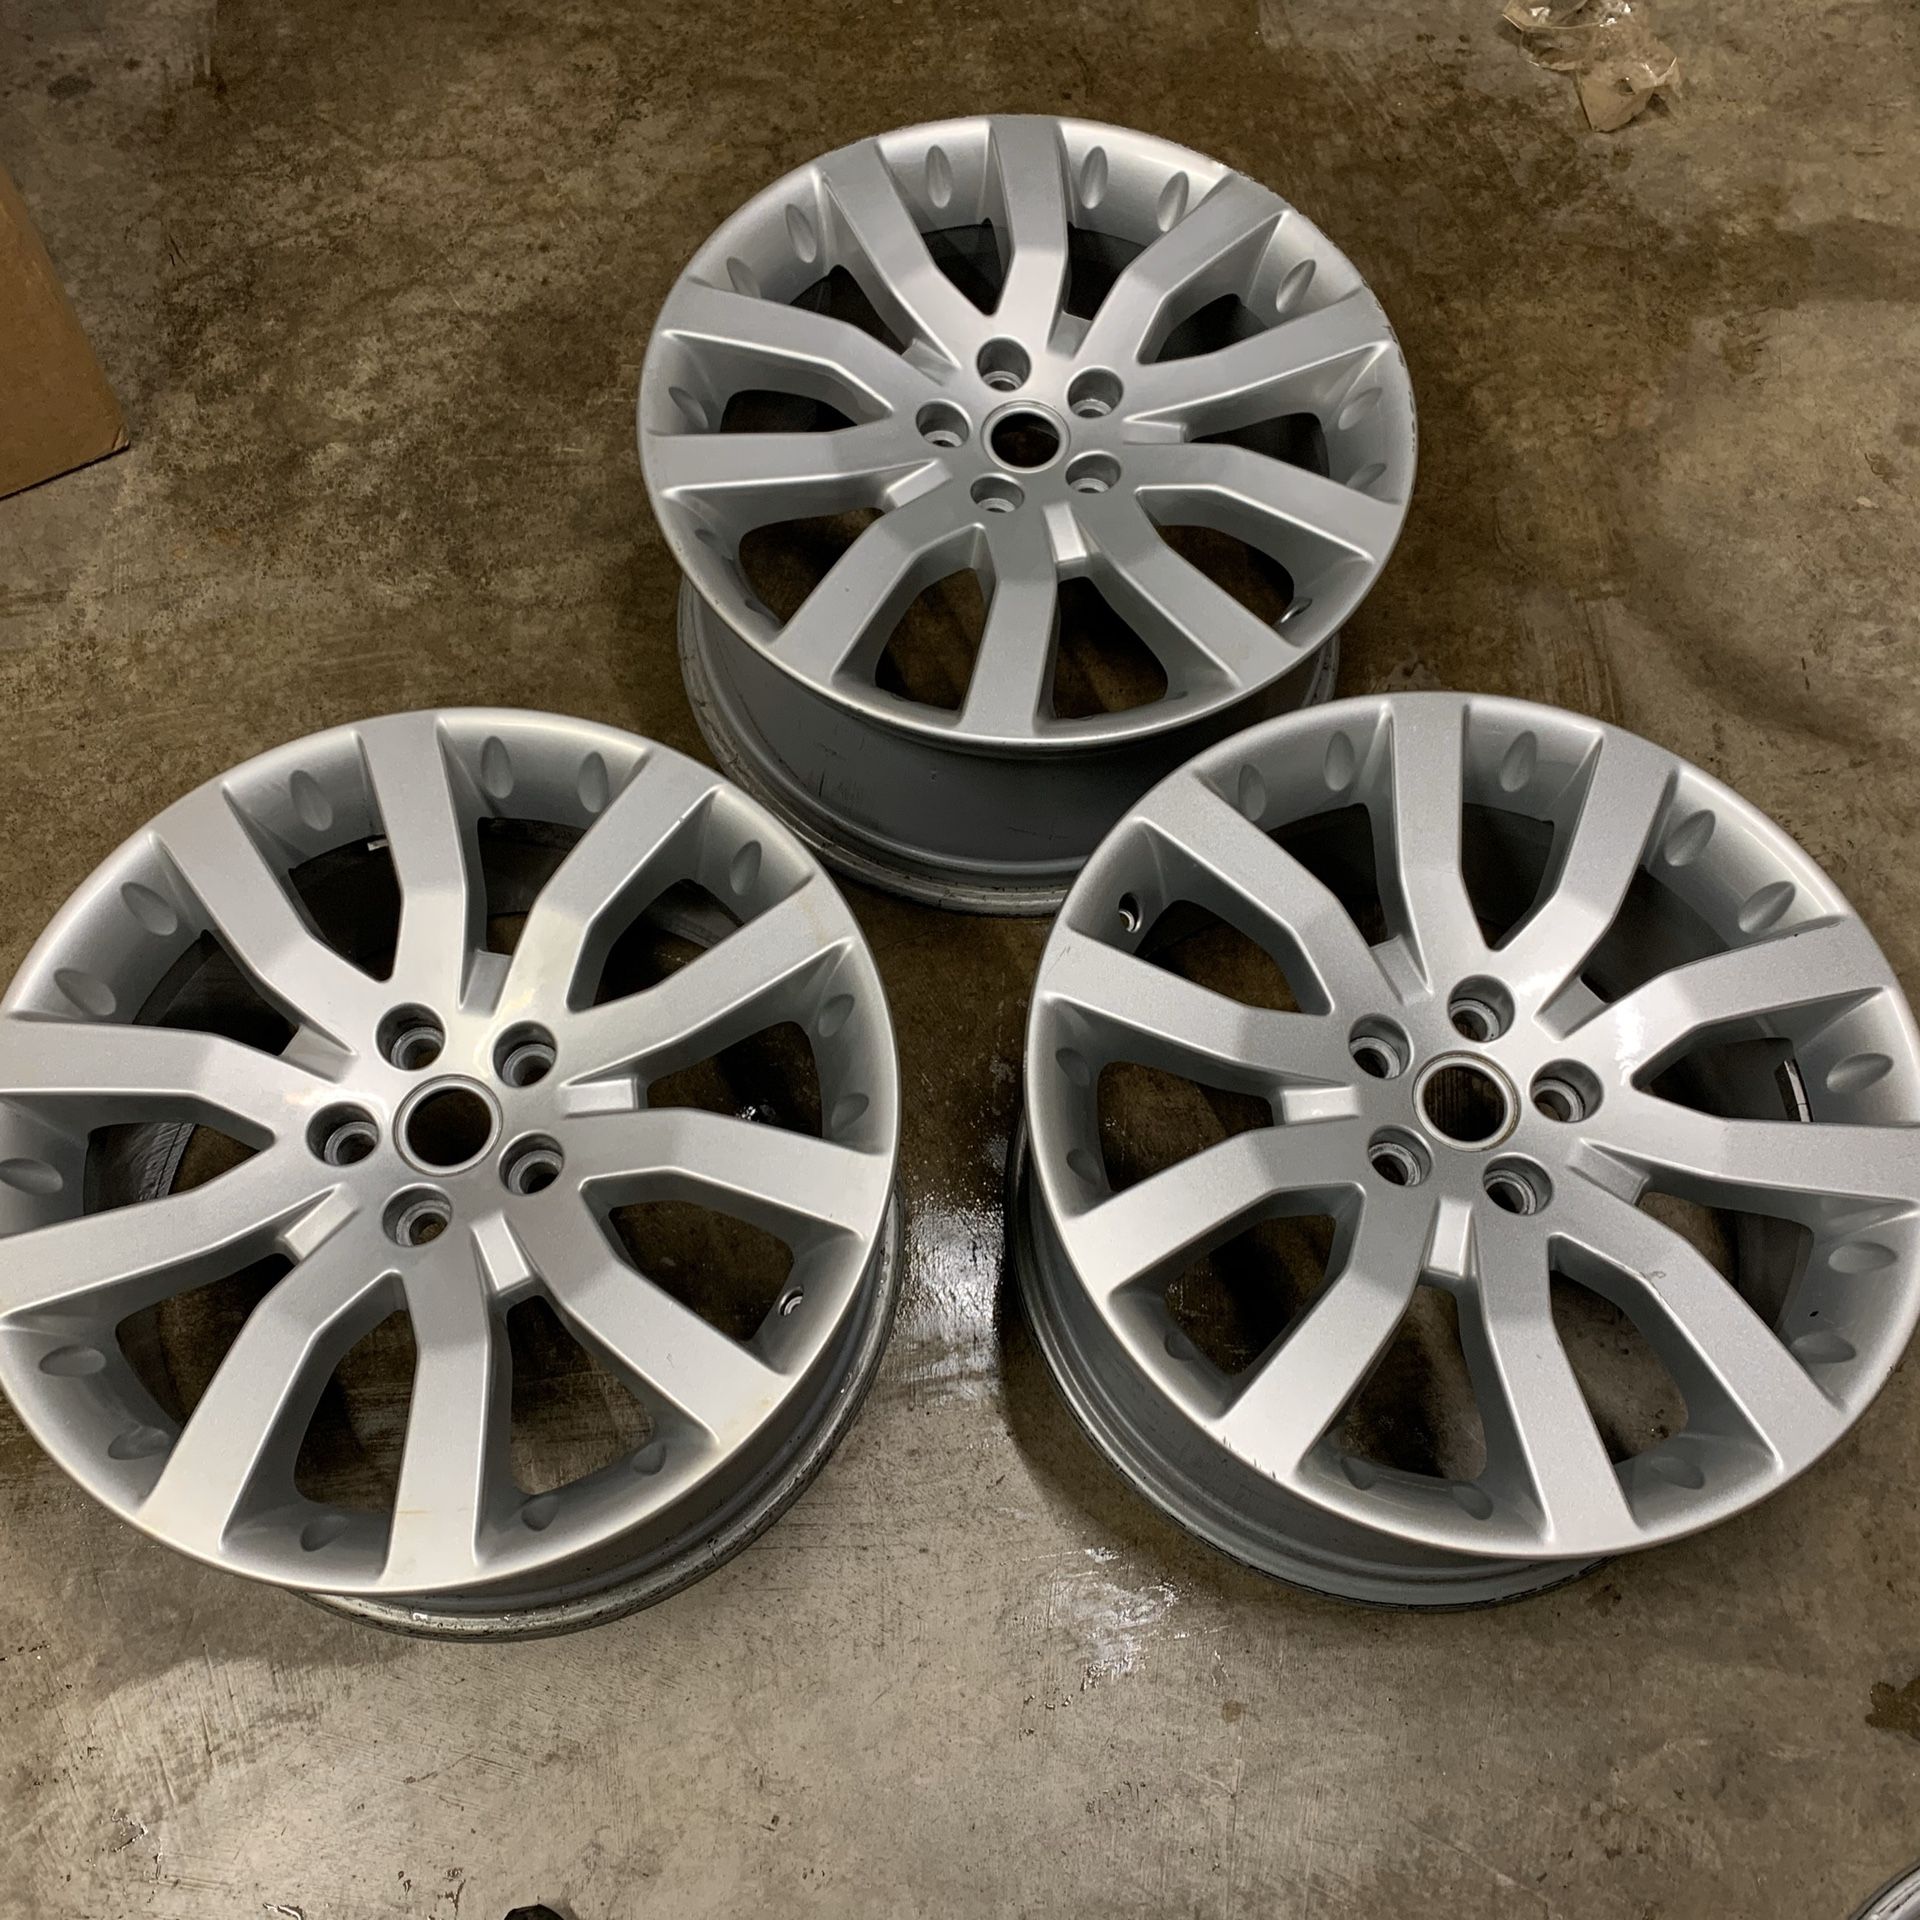 20" Range Rover OEM-Factory Genuine Rims (3 available)